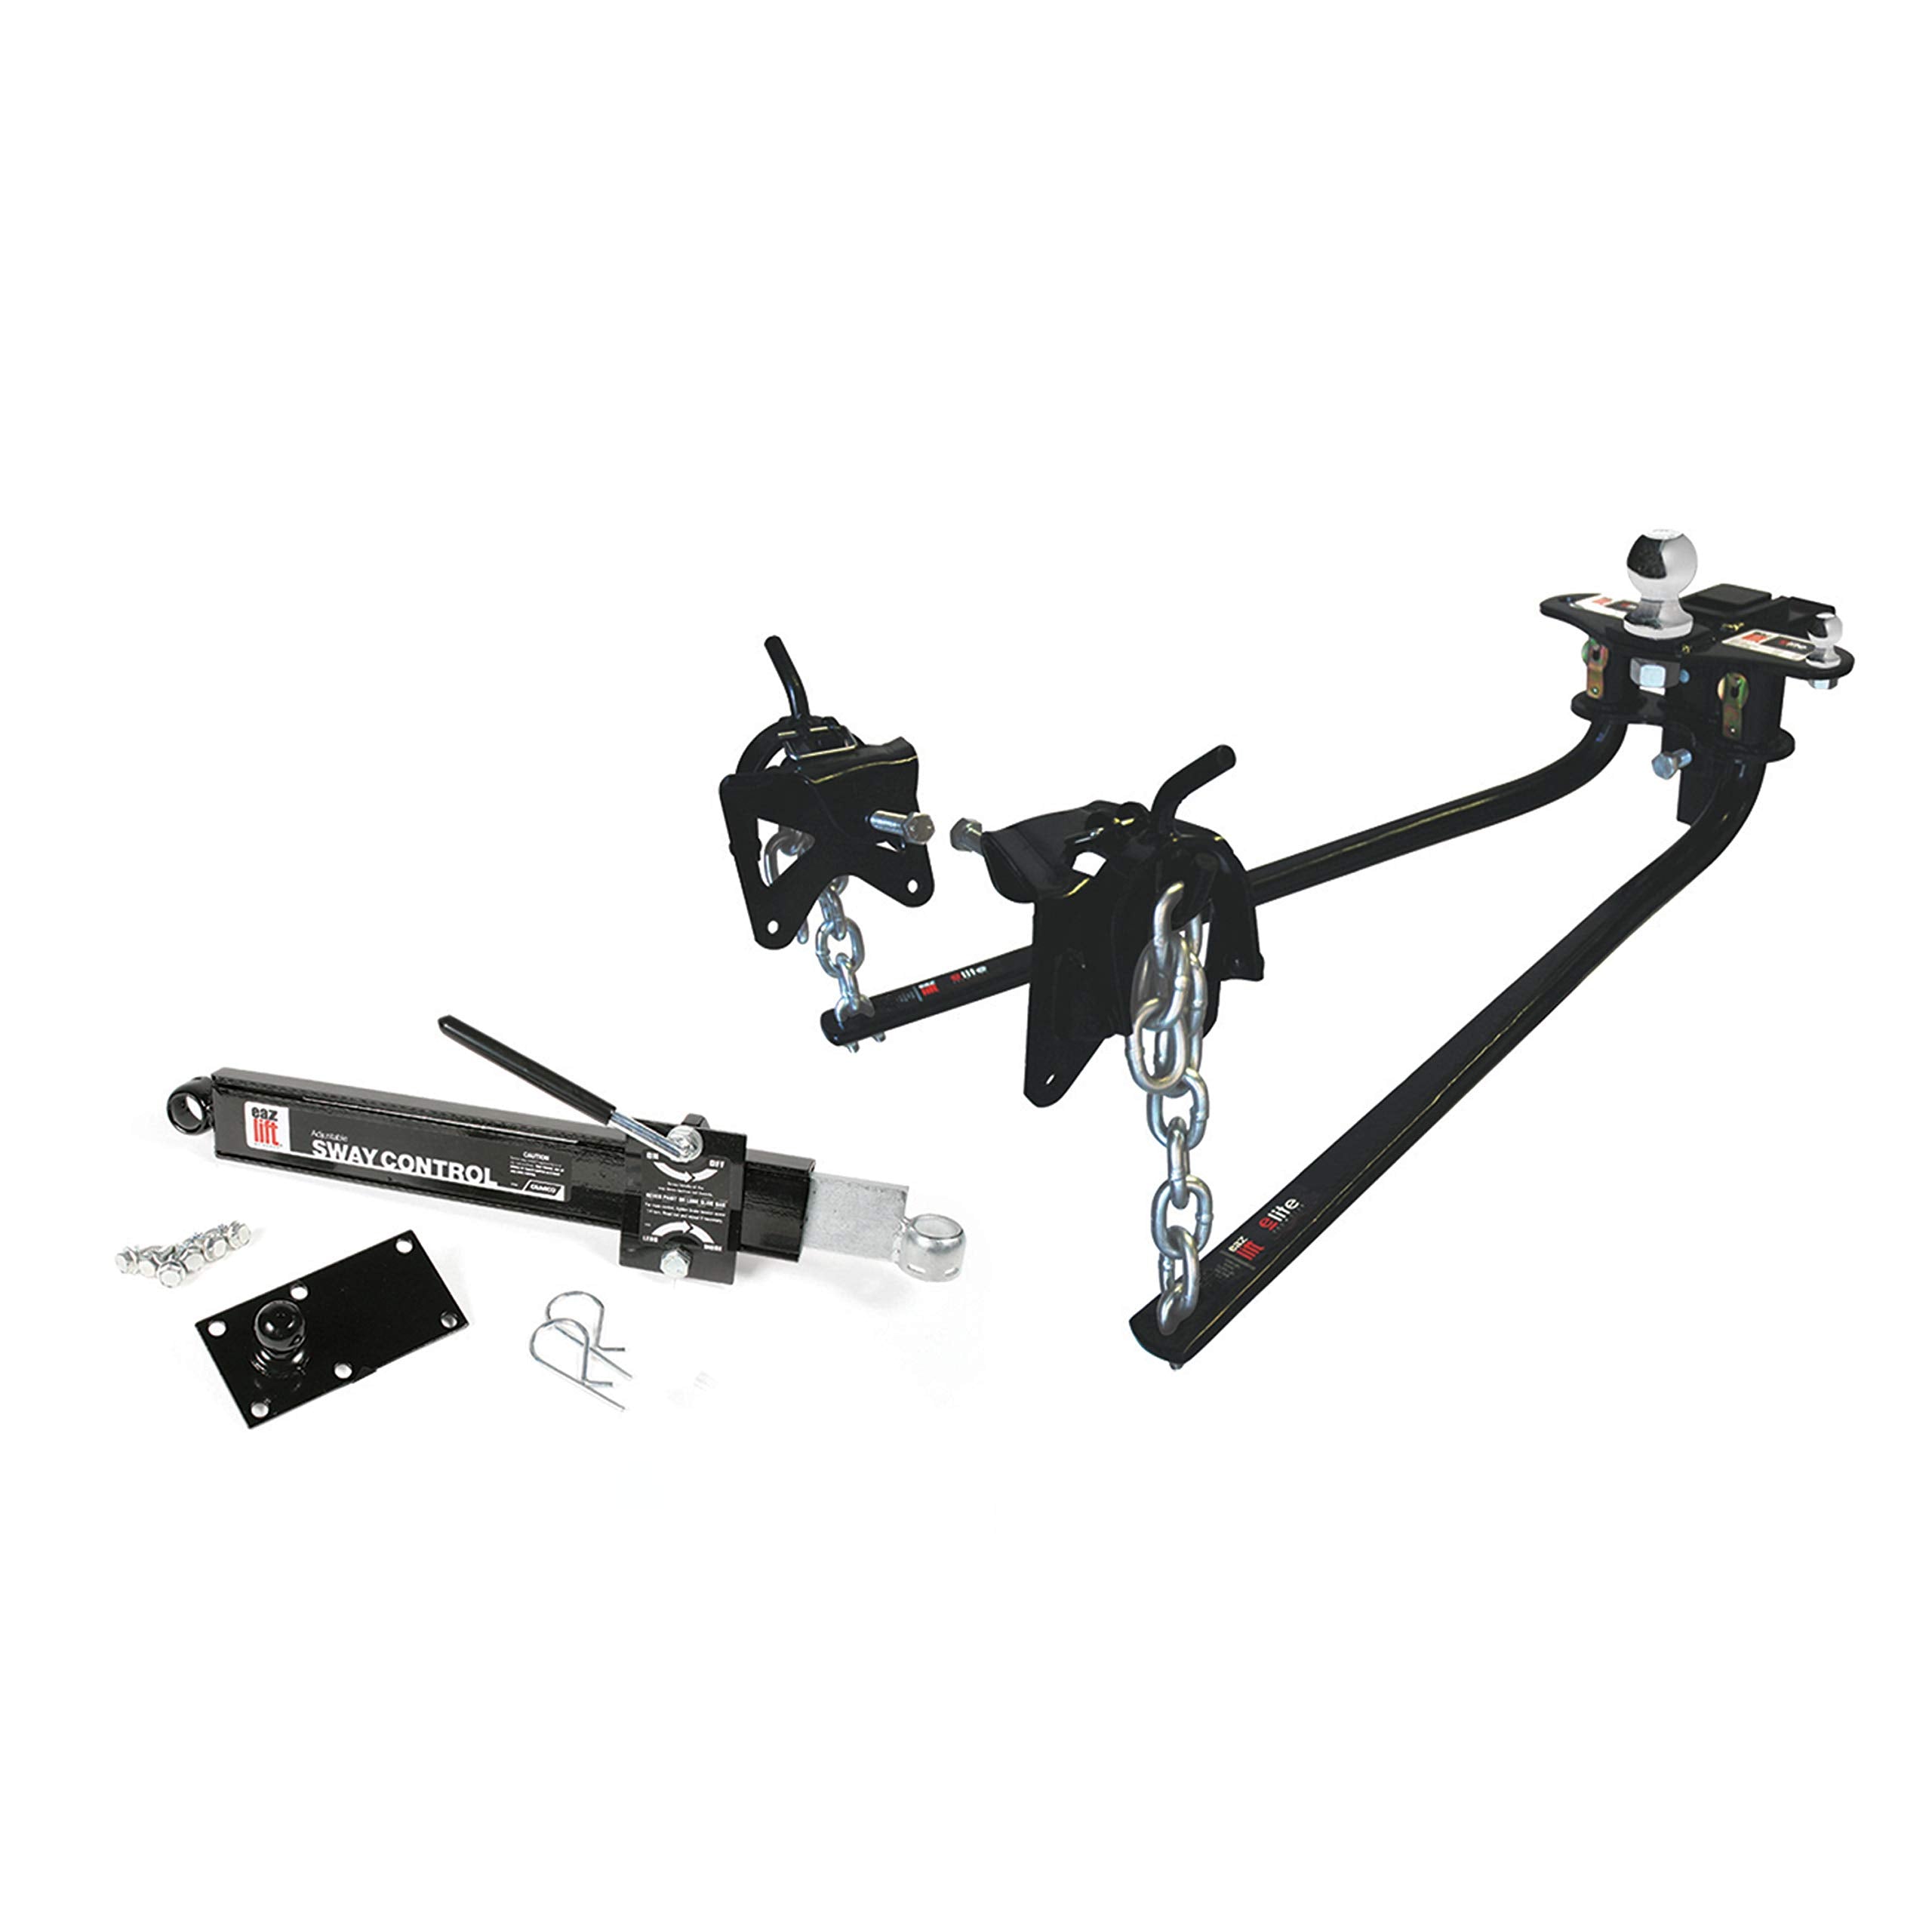 EAZ LIFT 48069 1200 lbs Elite Kit, Includes Distribution, Sway Control and 2-5/16" Hitch Ball-1,200 lbs Tongue Weight Capacity (48069)